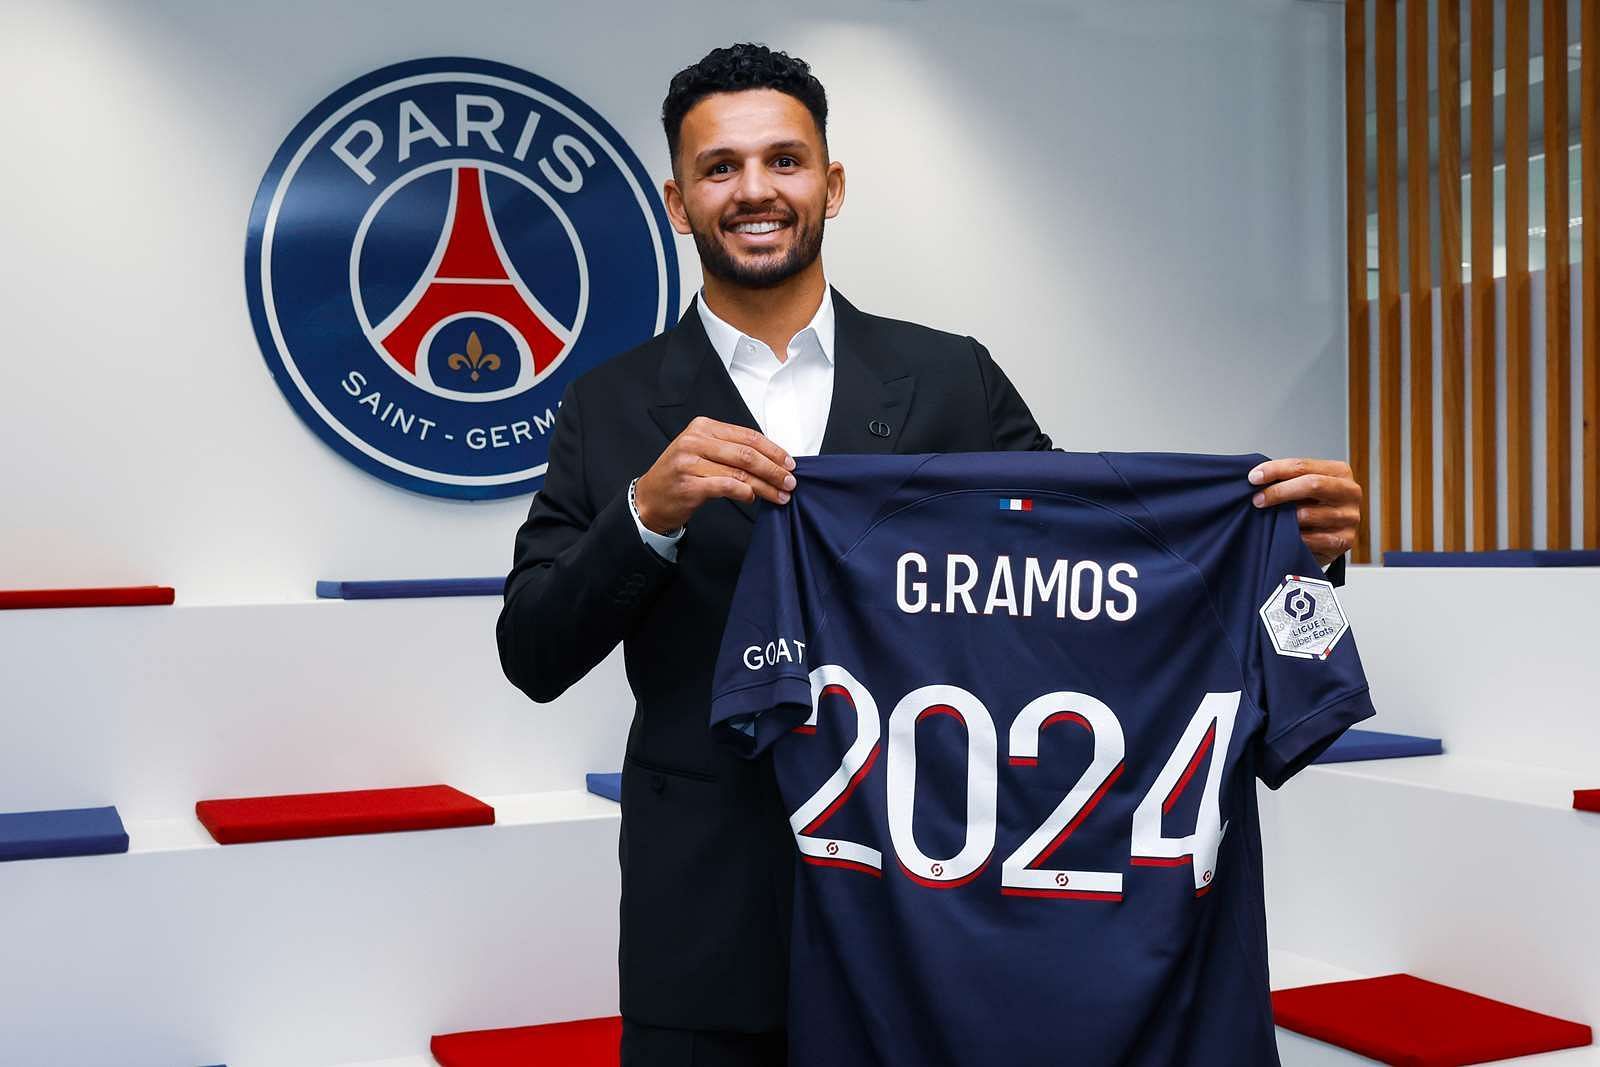 Goncalo Ramos has joined Paris Saint-Germain on loan (cred: PSG official website)